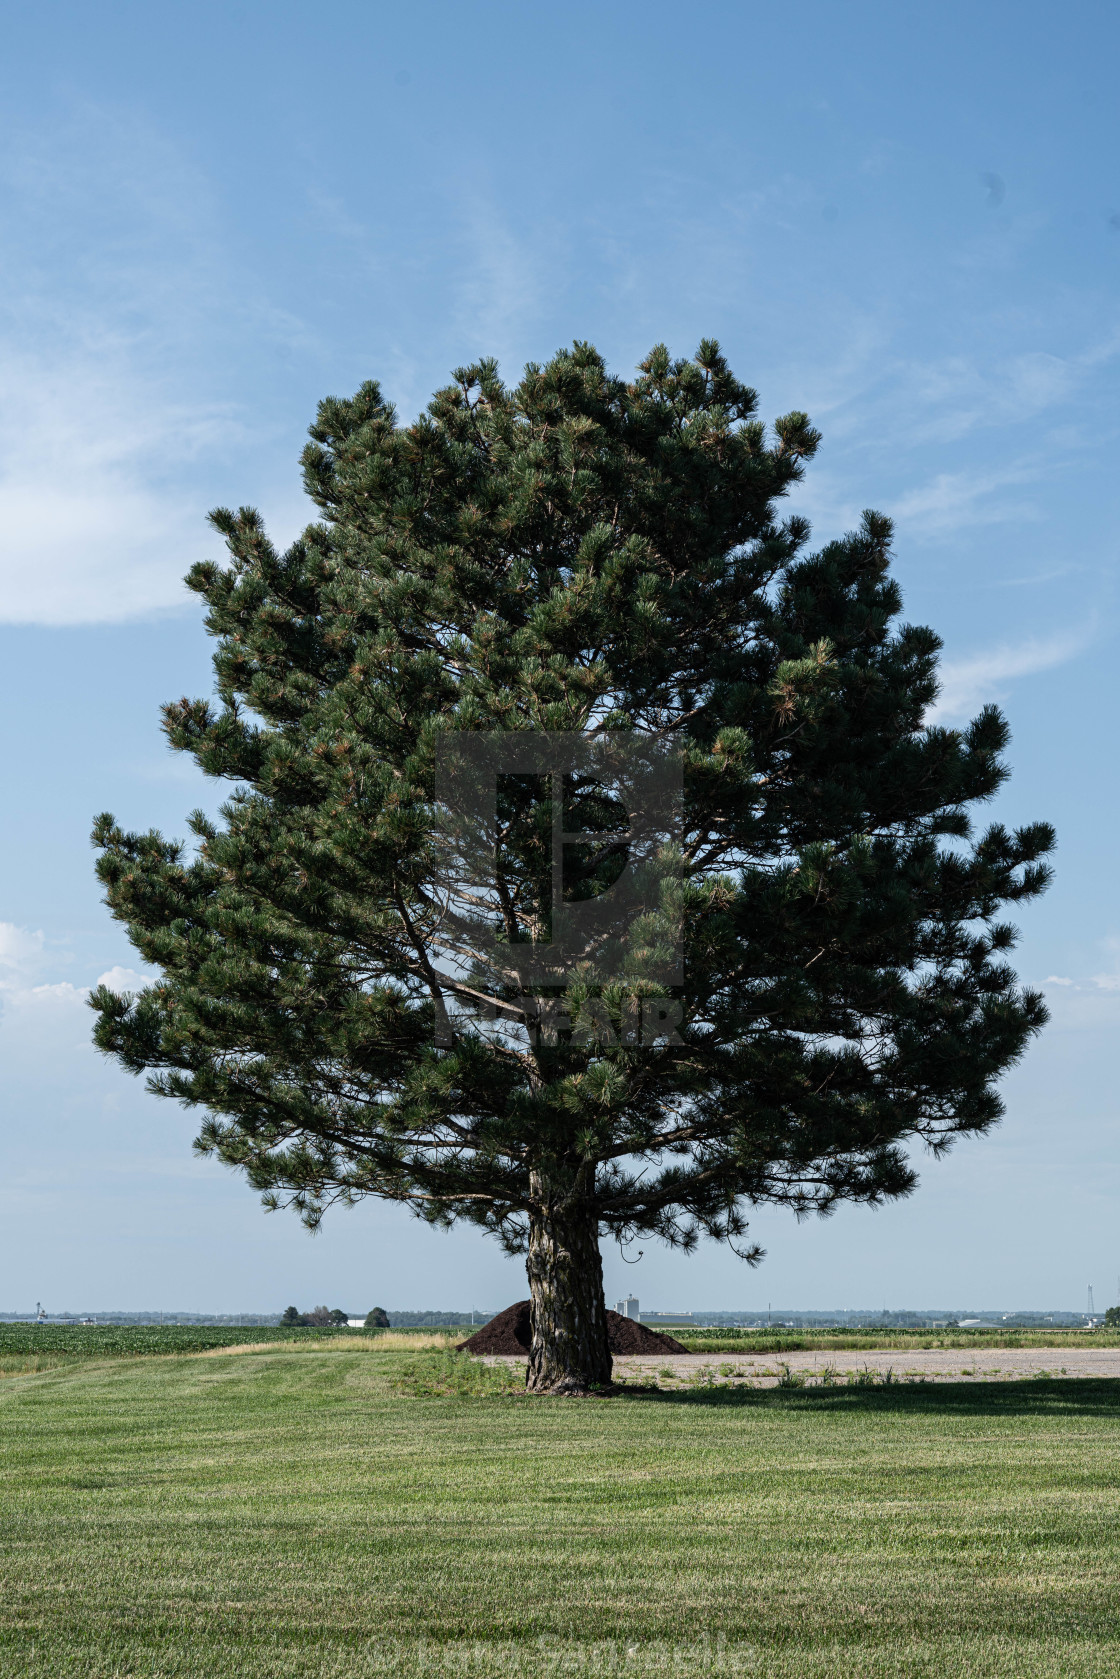 "A lone tree" stock image